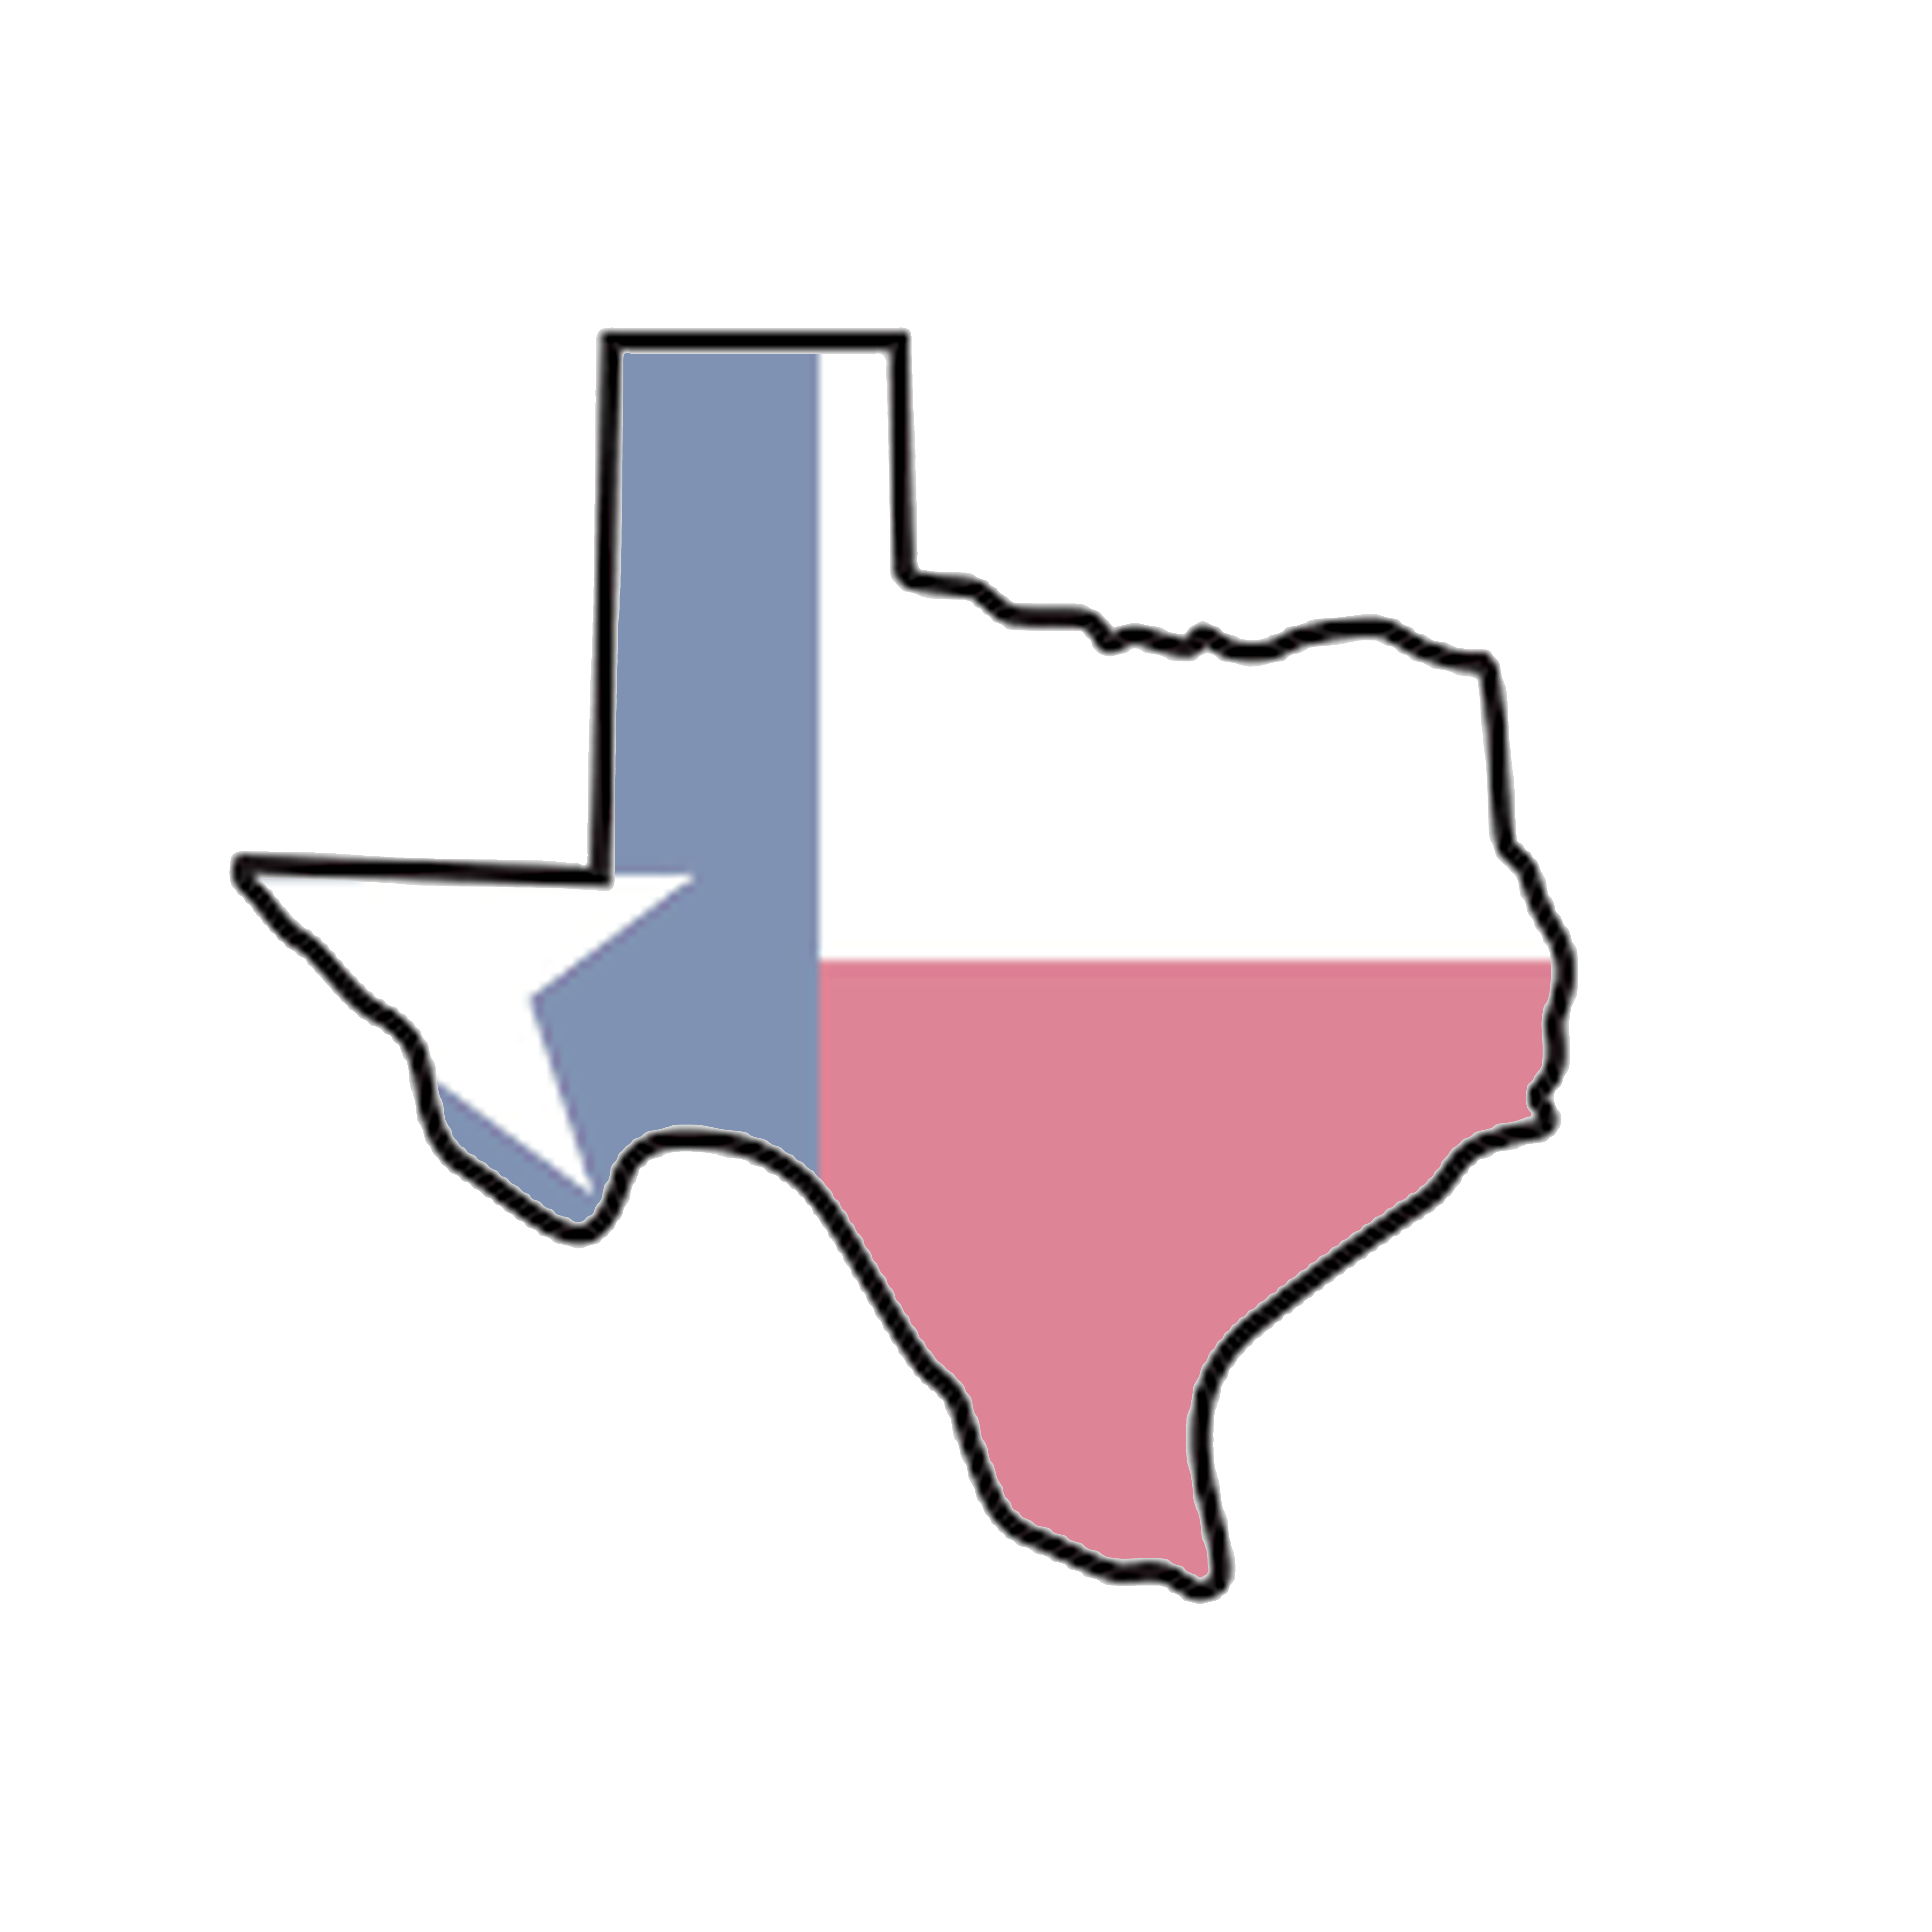 The state of Texas, a true outdoor living specialist, is showcased in the shape of a flag.